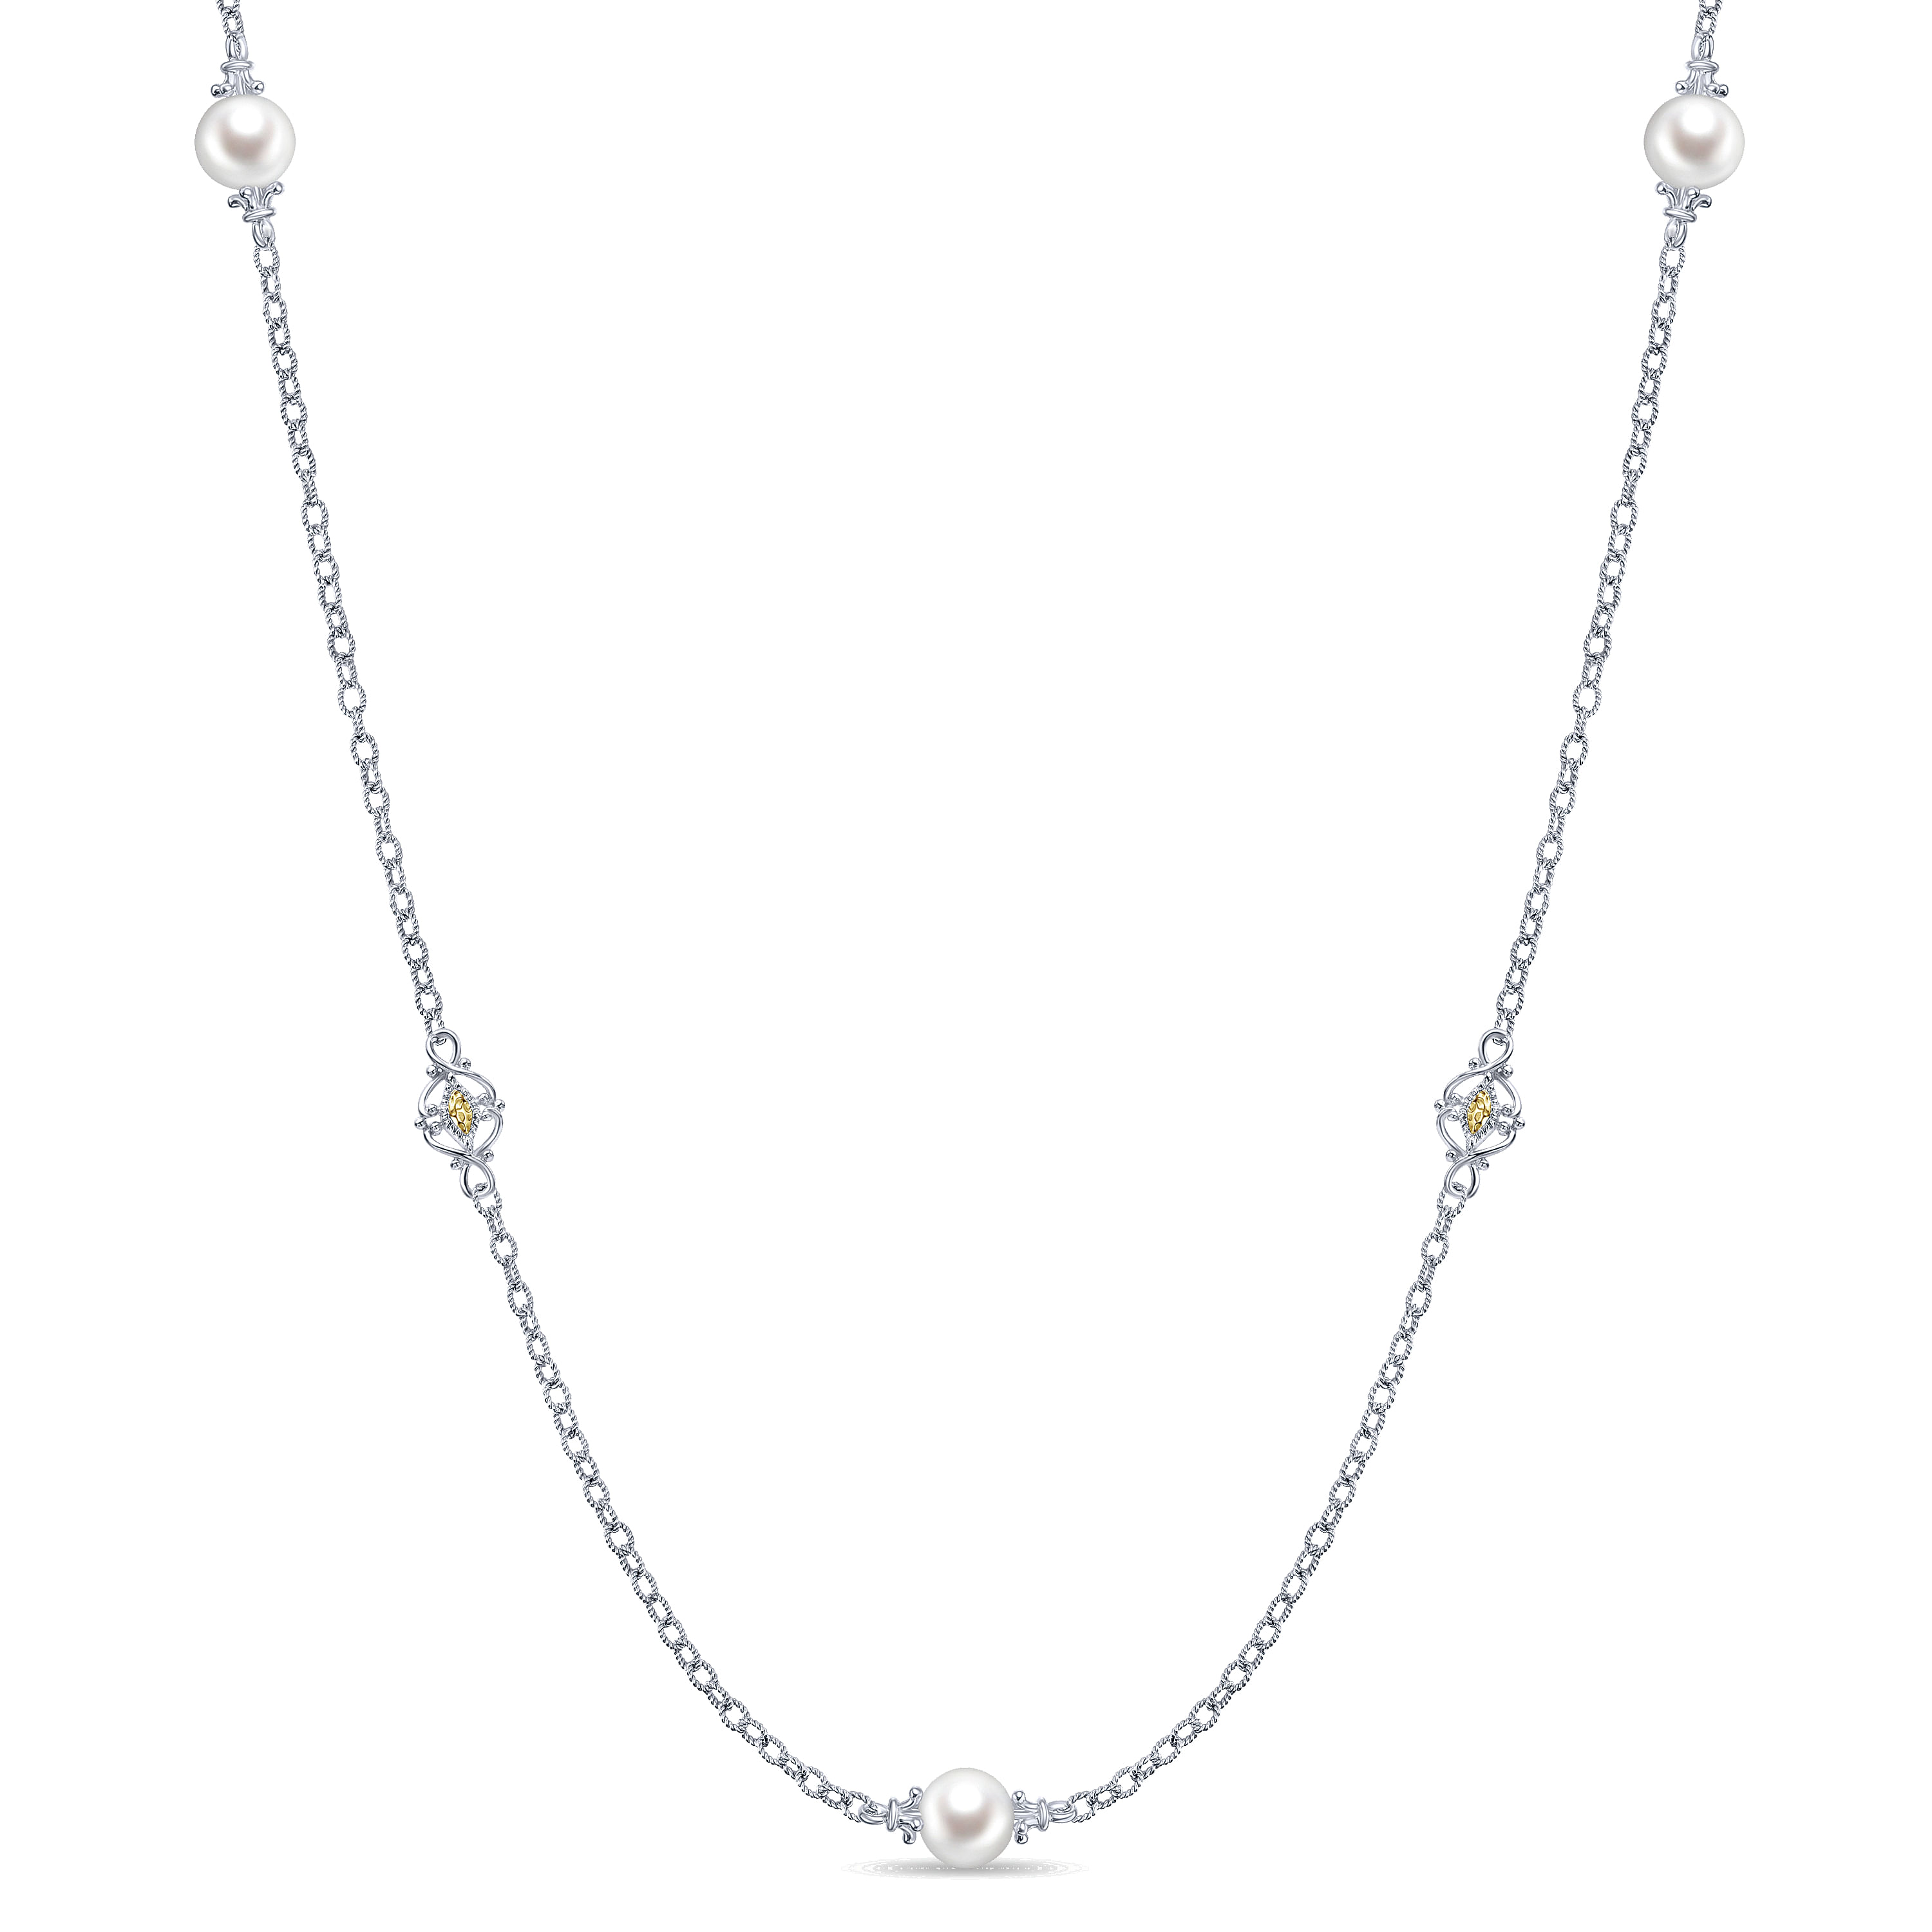 24 inch 925 Sterling Silver and 18K Yellow Gold Cultured Pearl and Filigree Station Necklace